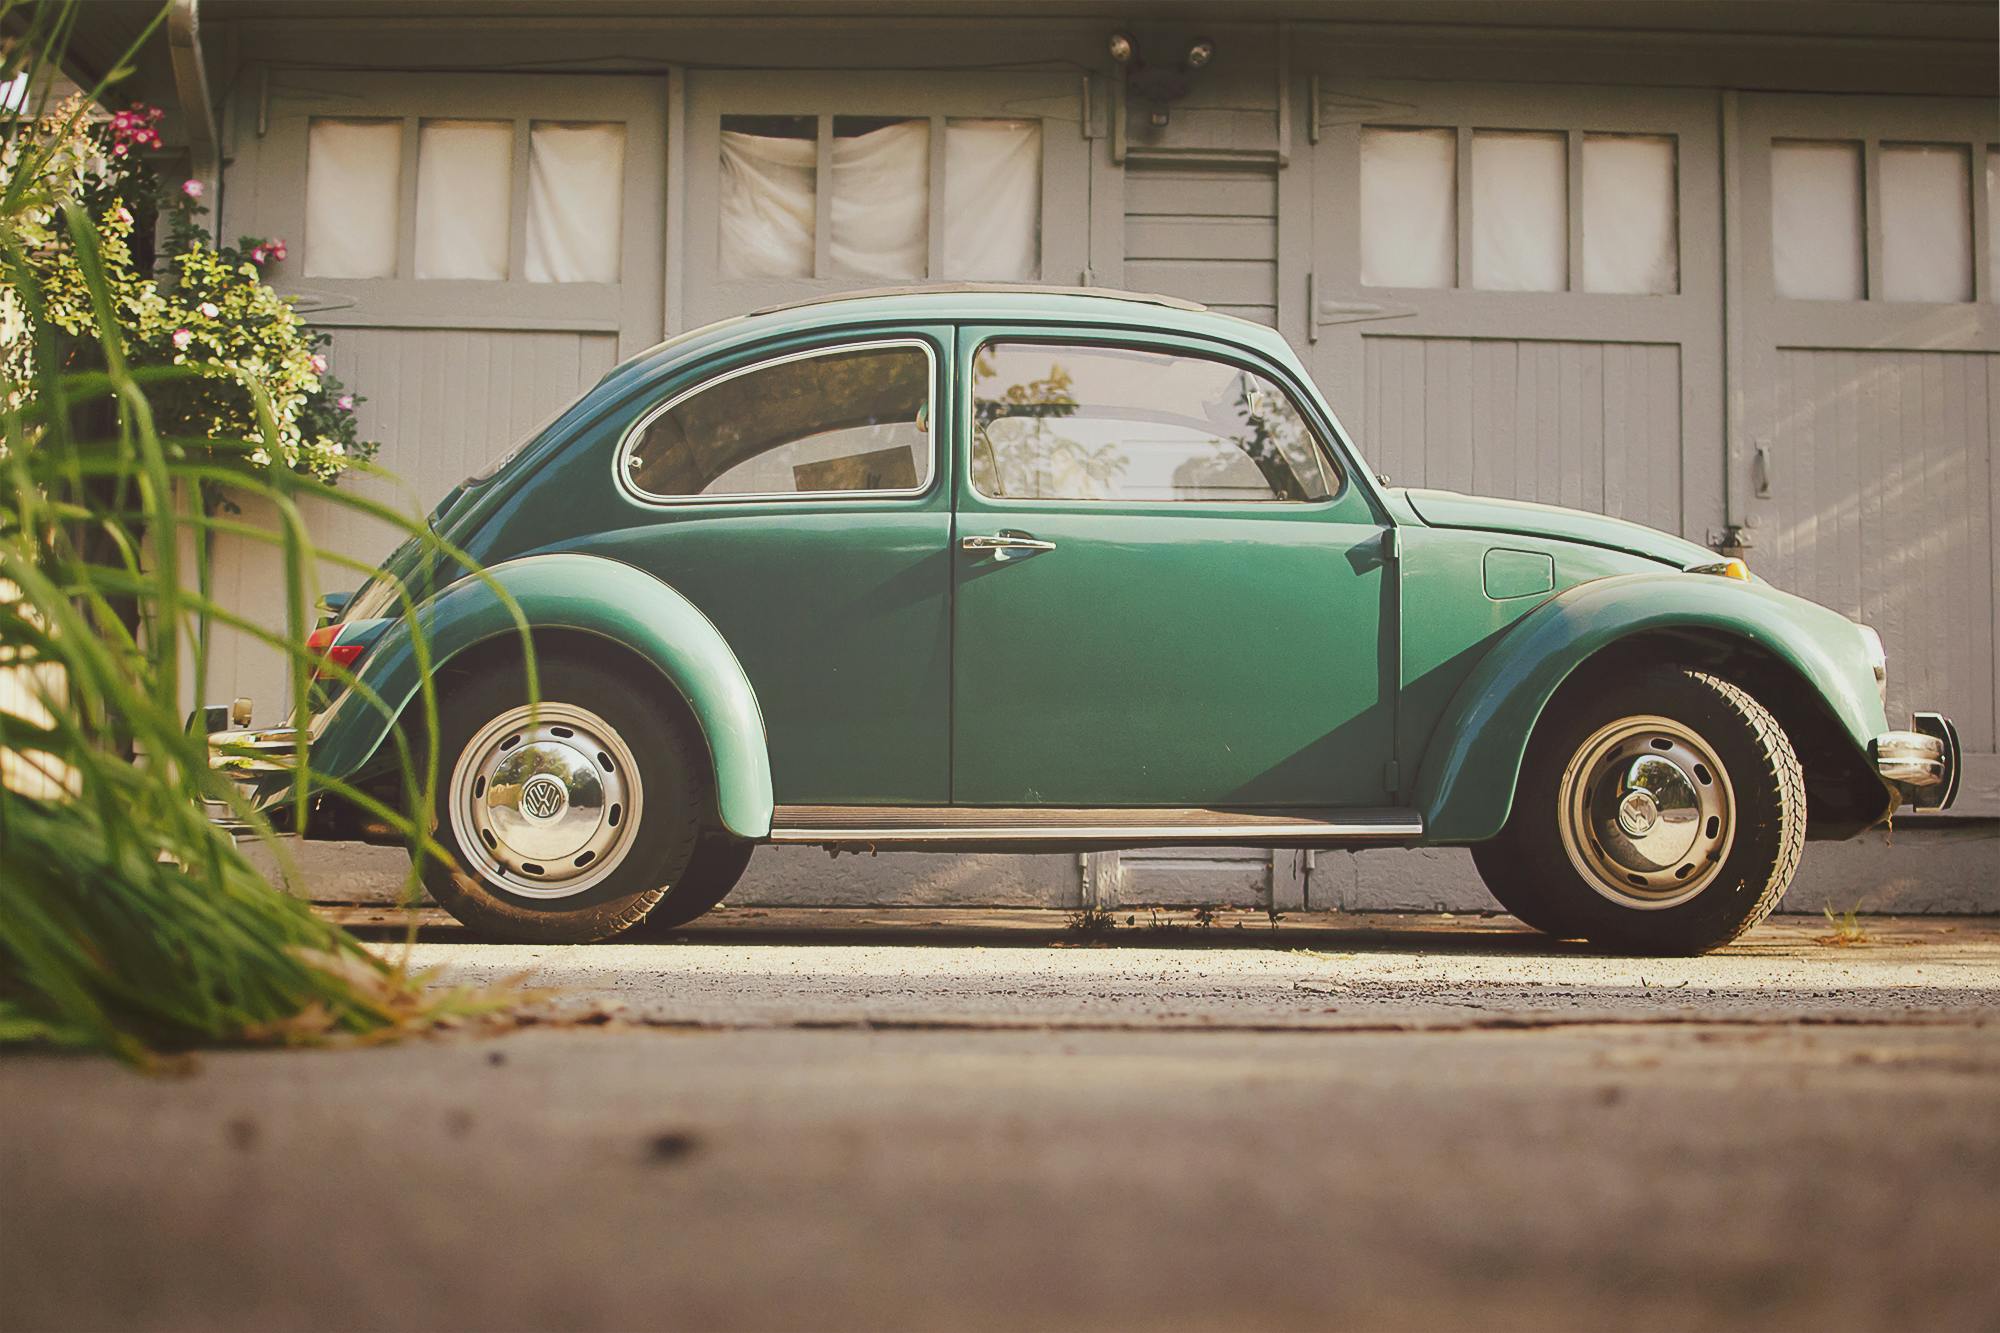 1946–79 VW Beetle values are finding wings, but some are still